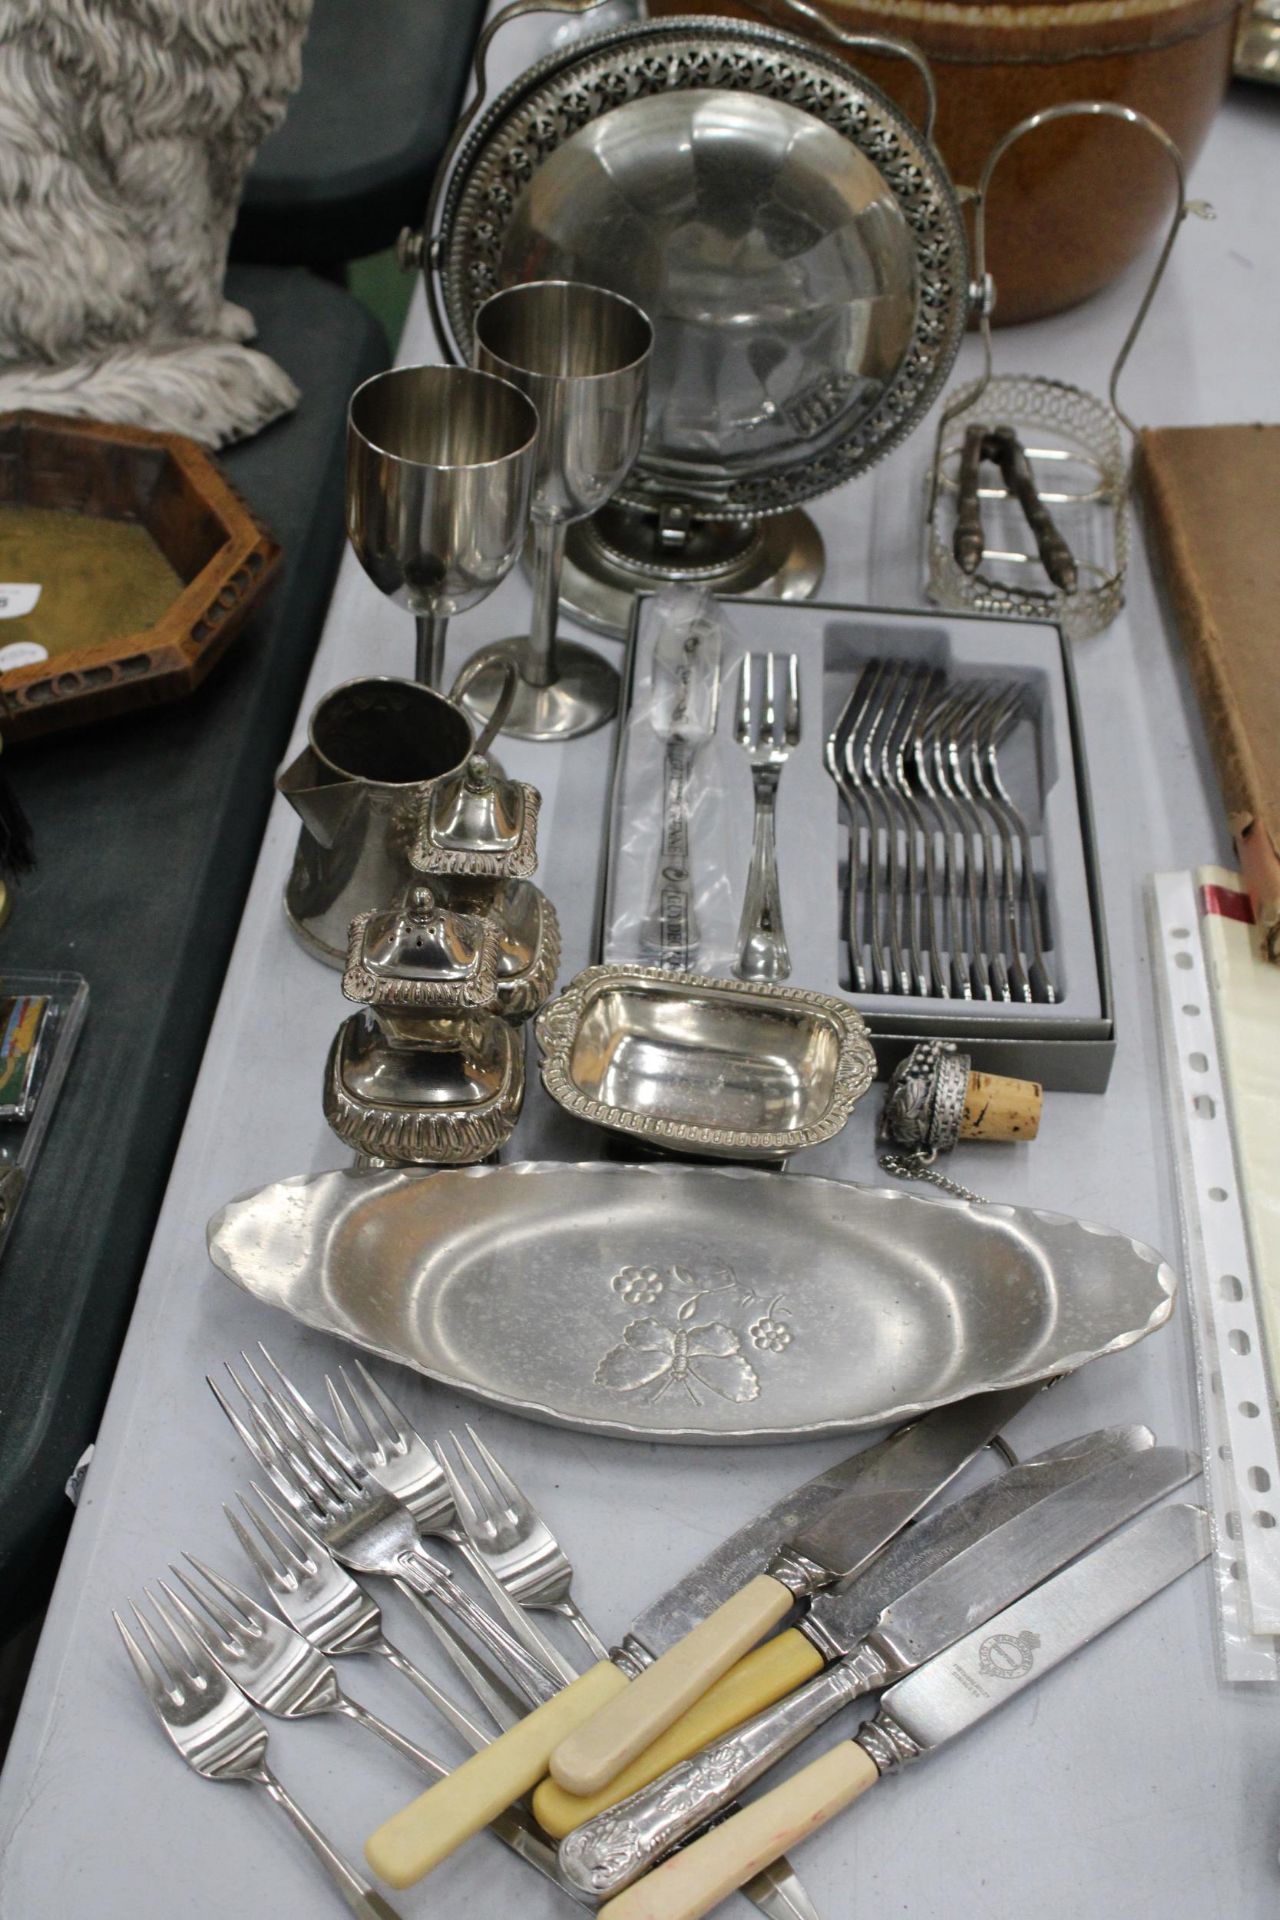 A QUANTITY OF SILVER PLATED AND METAL ITEMS TO INCLUDE GOBLETS, A CRUET SET, DISHES, FLATWARE, ETC